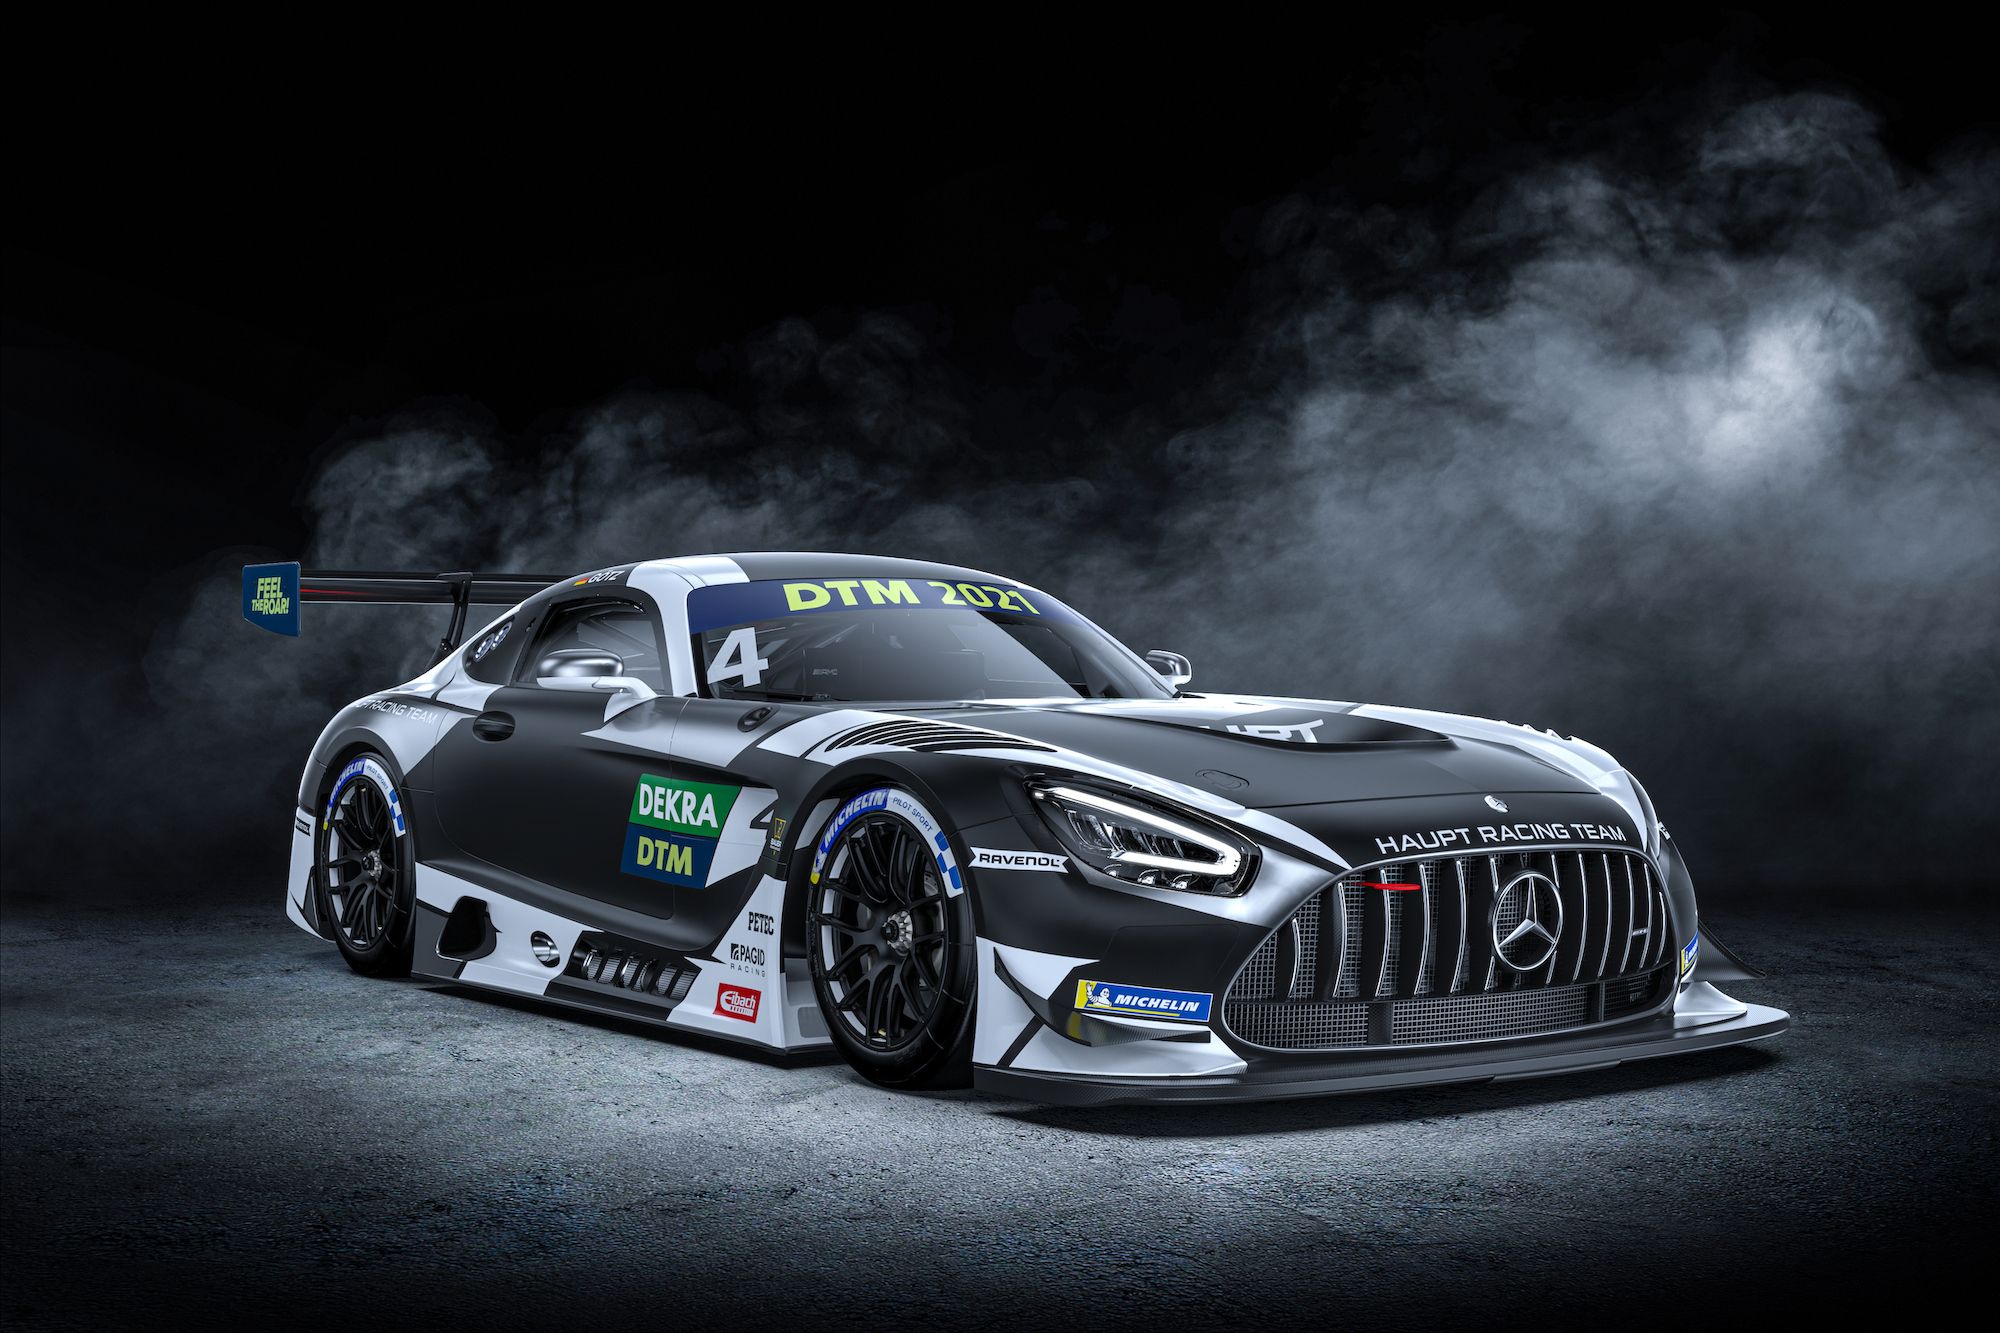 Mercedes-AMG sets sights on DTM racing with with five teams